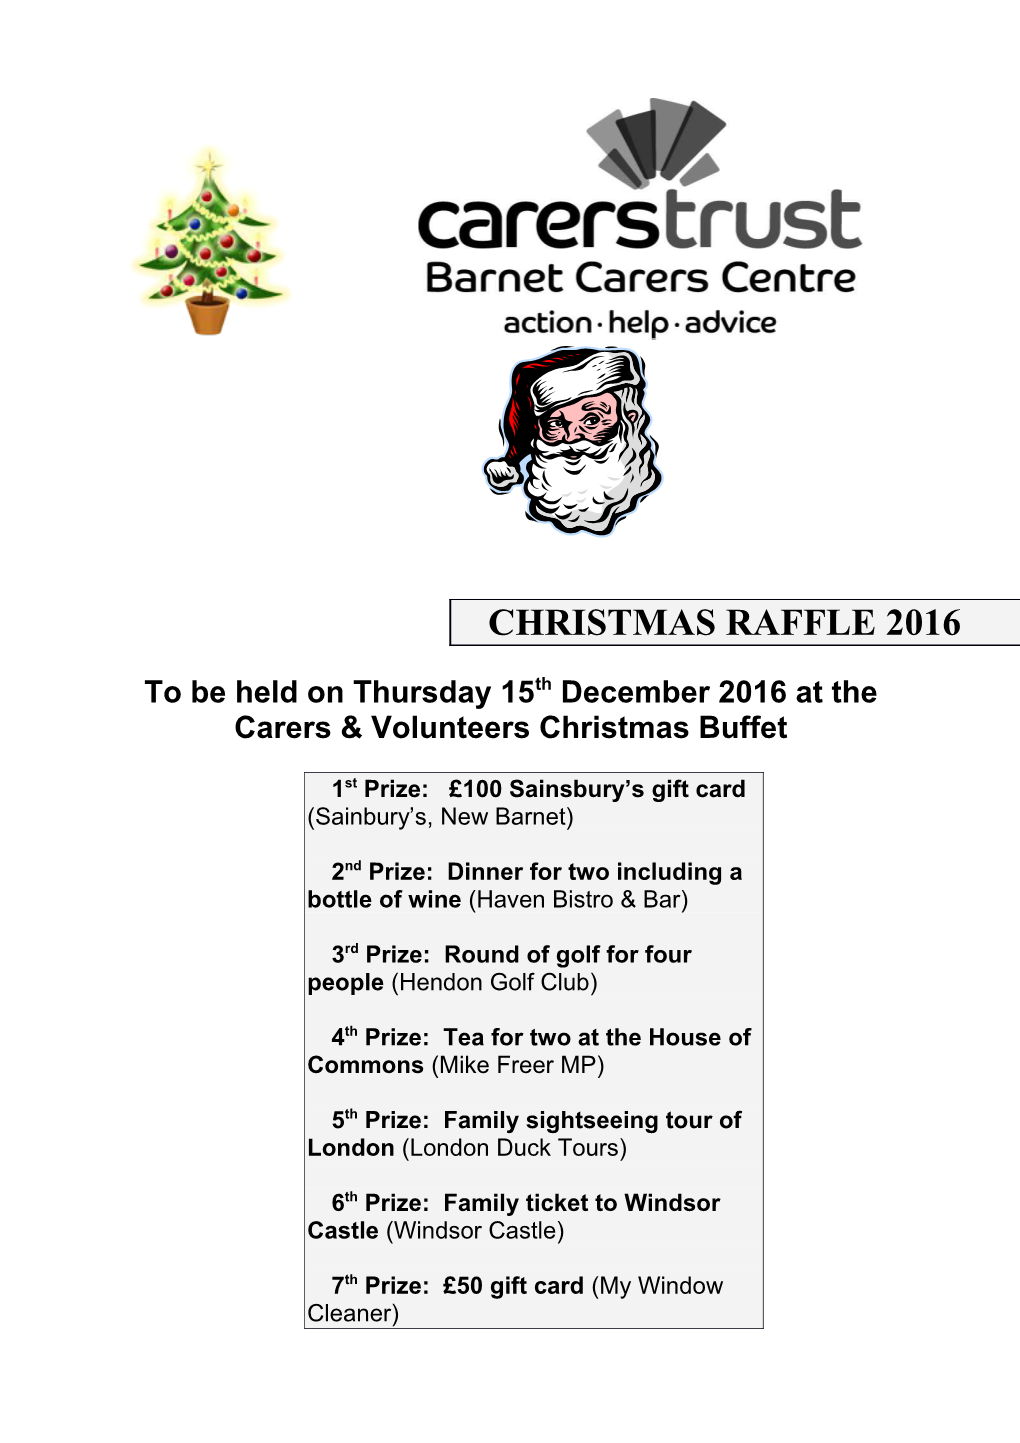 To Be Held on Thursday 15Th December 2016 at the Carers & Volunteers Christmas Buffet